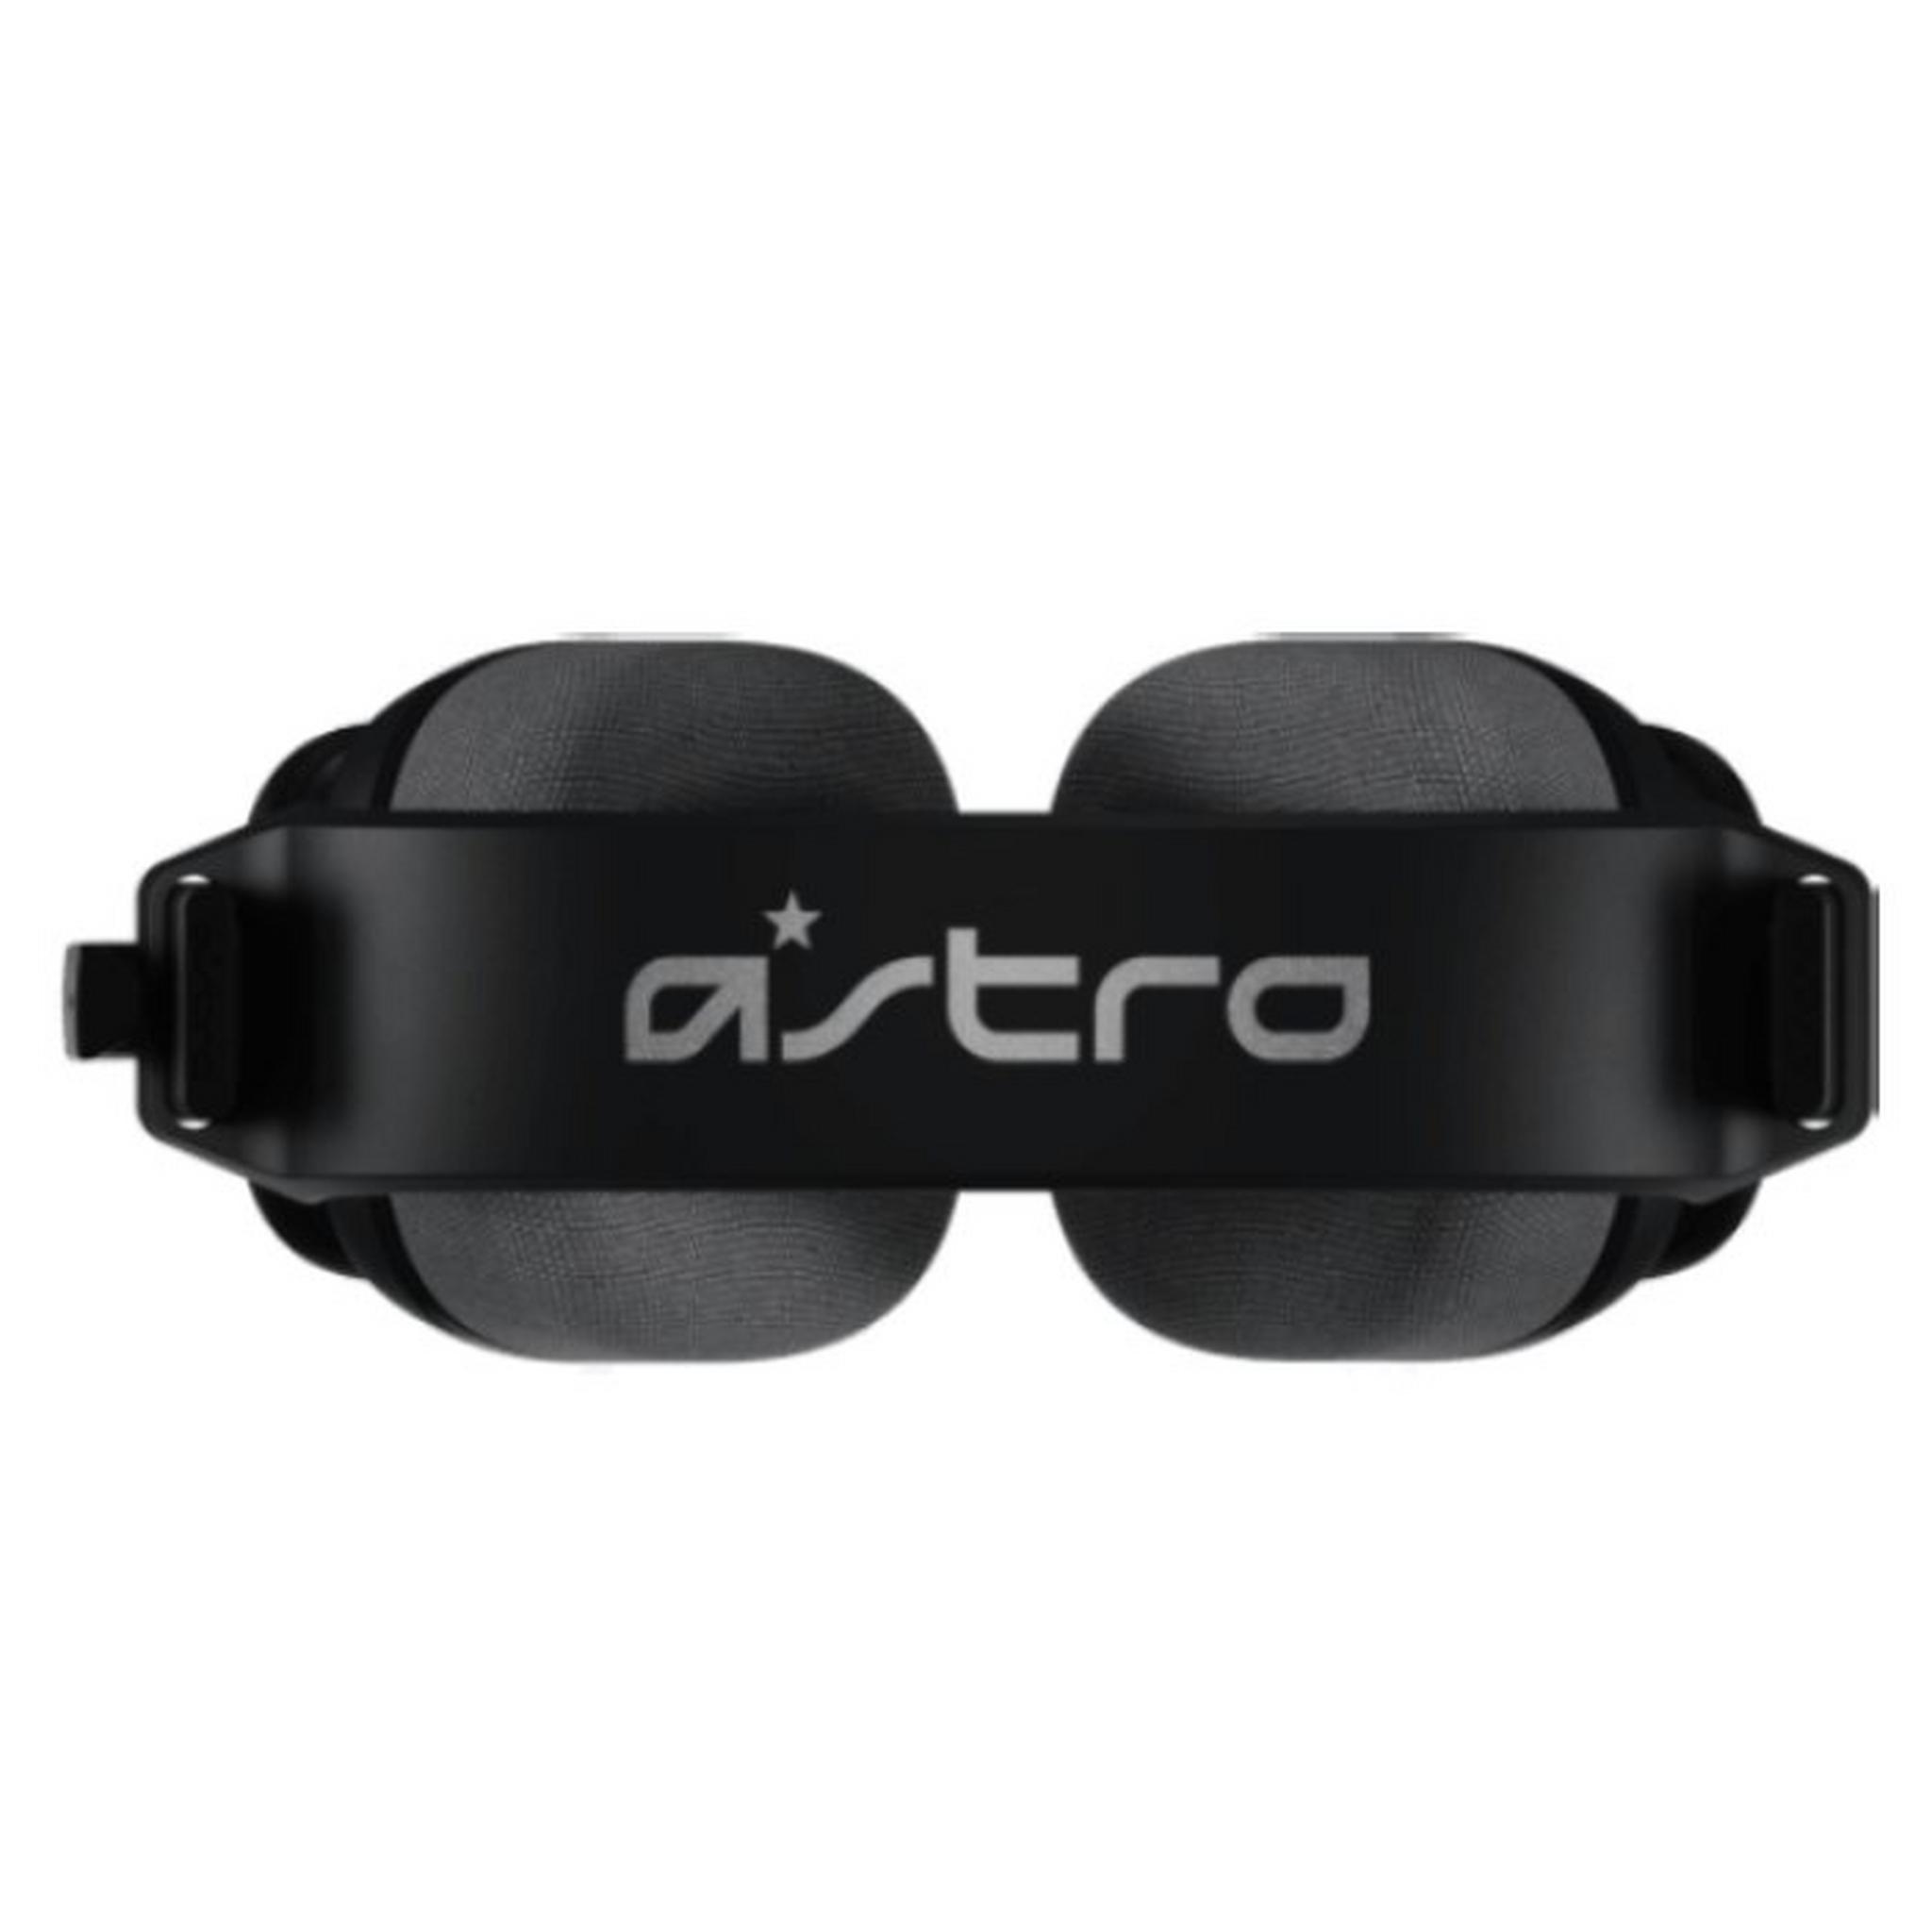 Astro A10 PlayStation Gaming Headset - Salvage Black